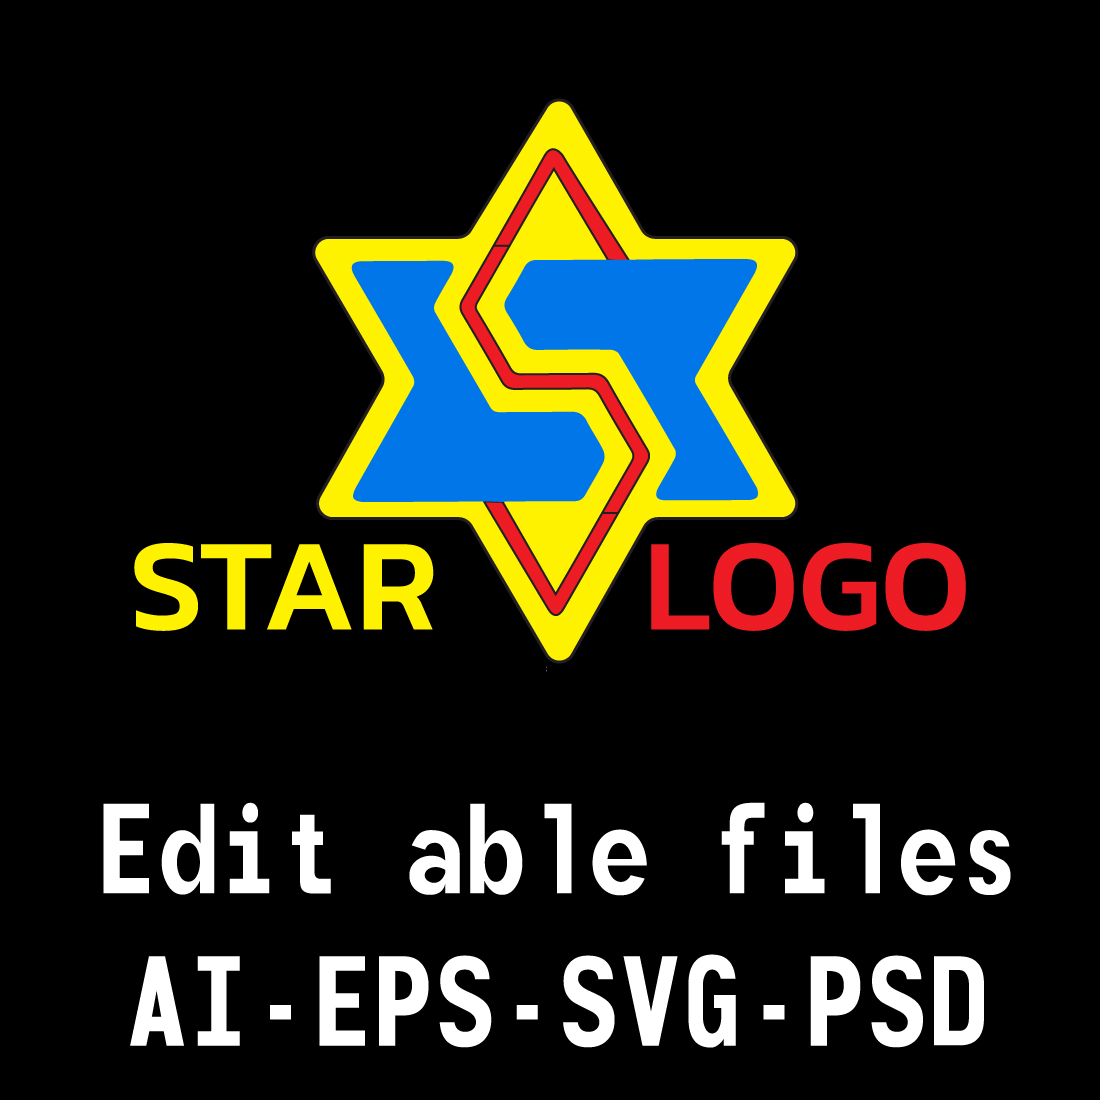 Star S Later logo preview image.